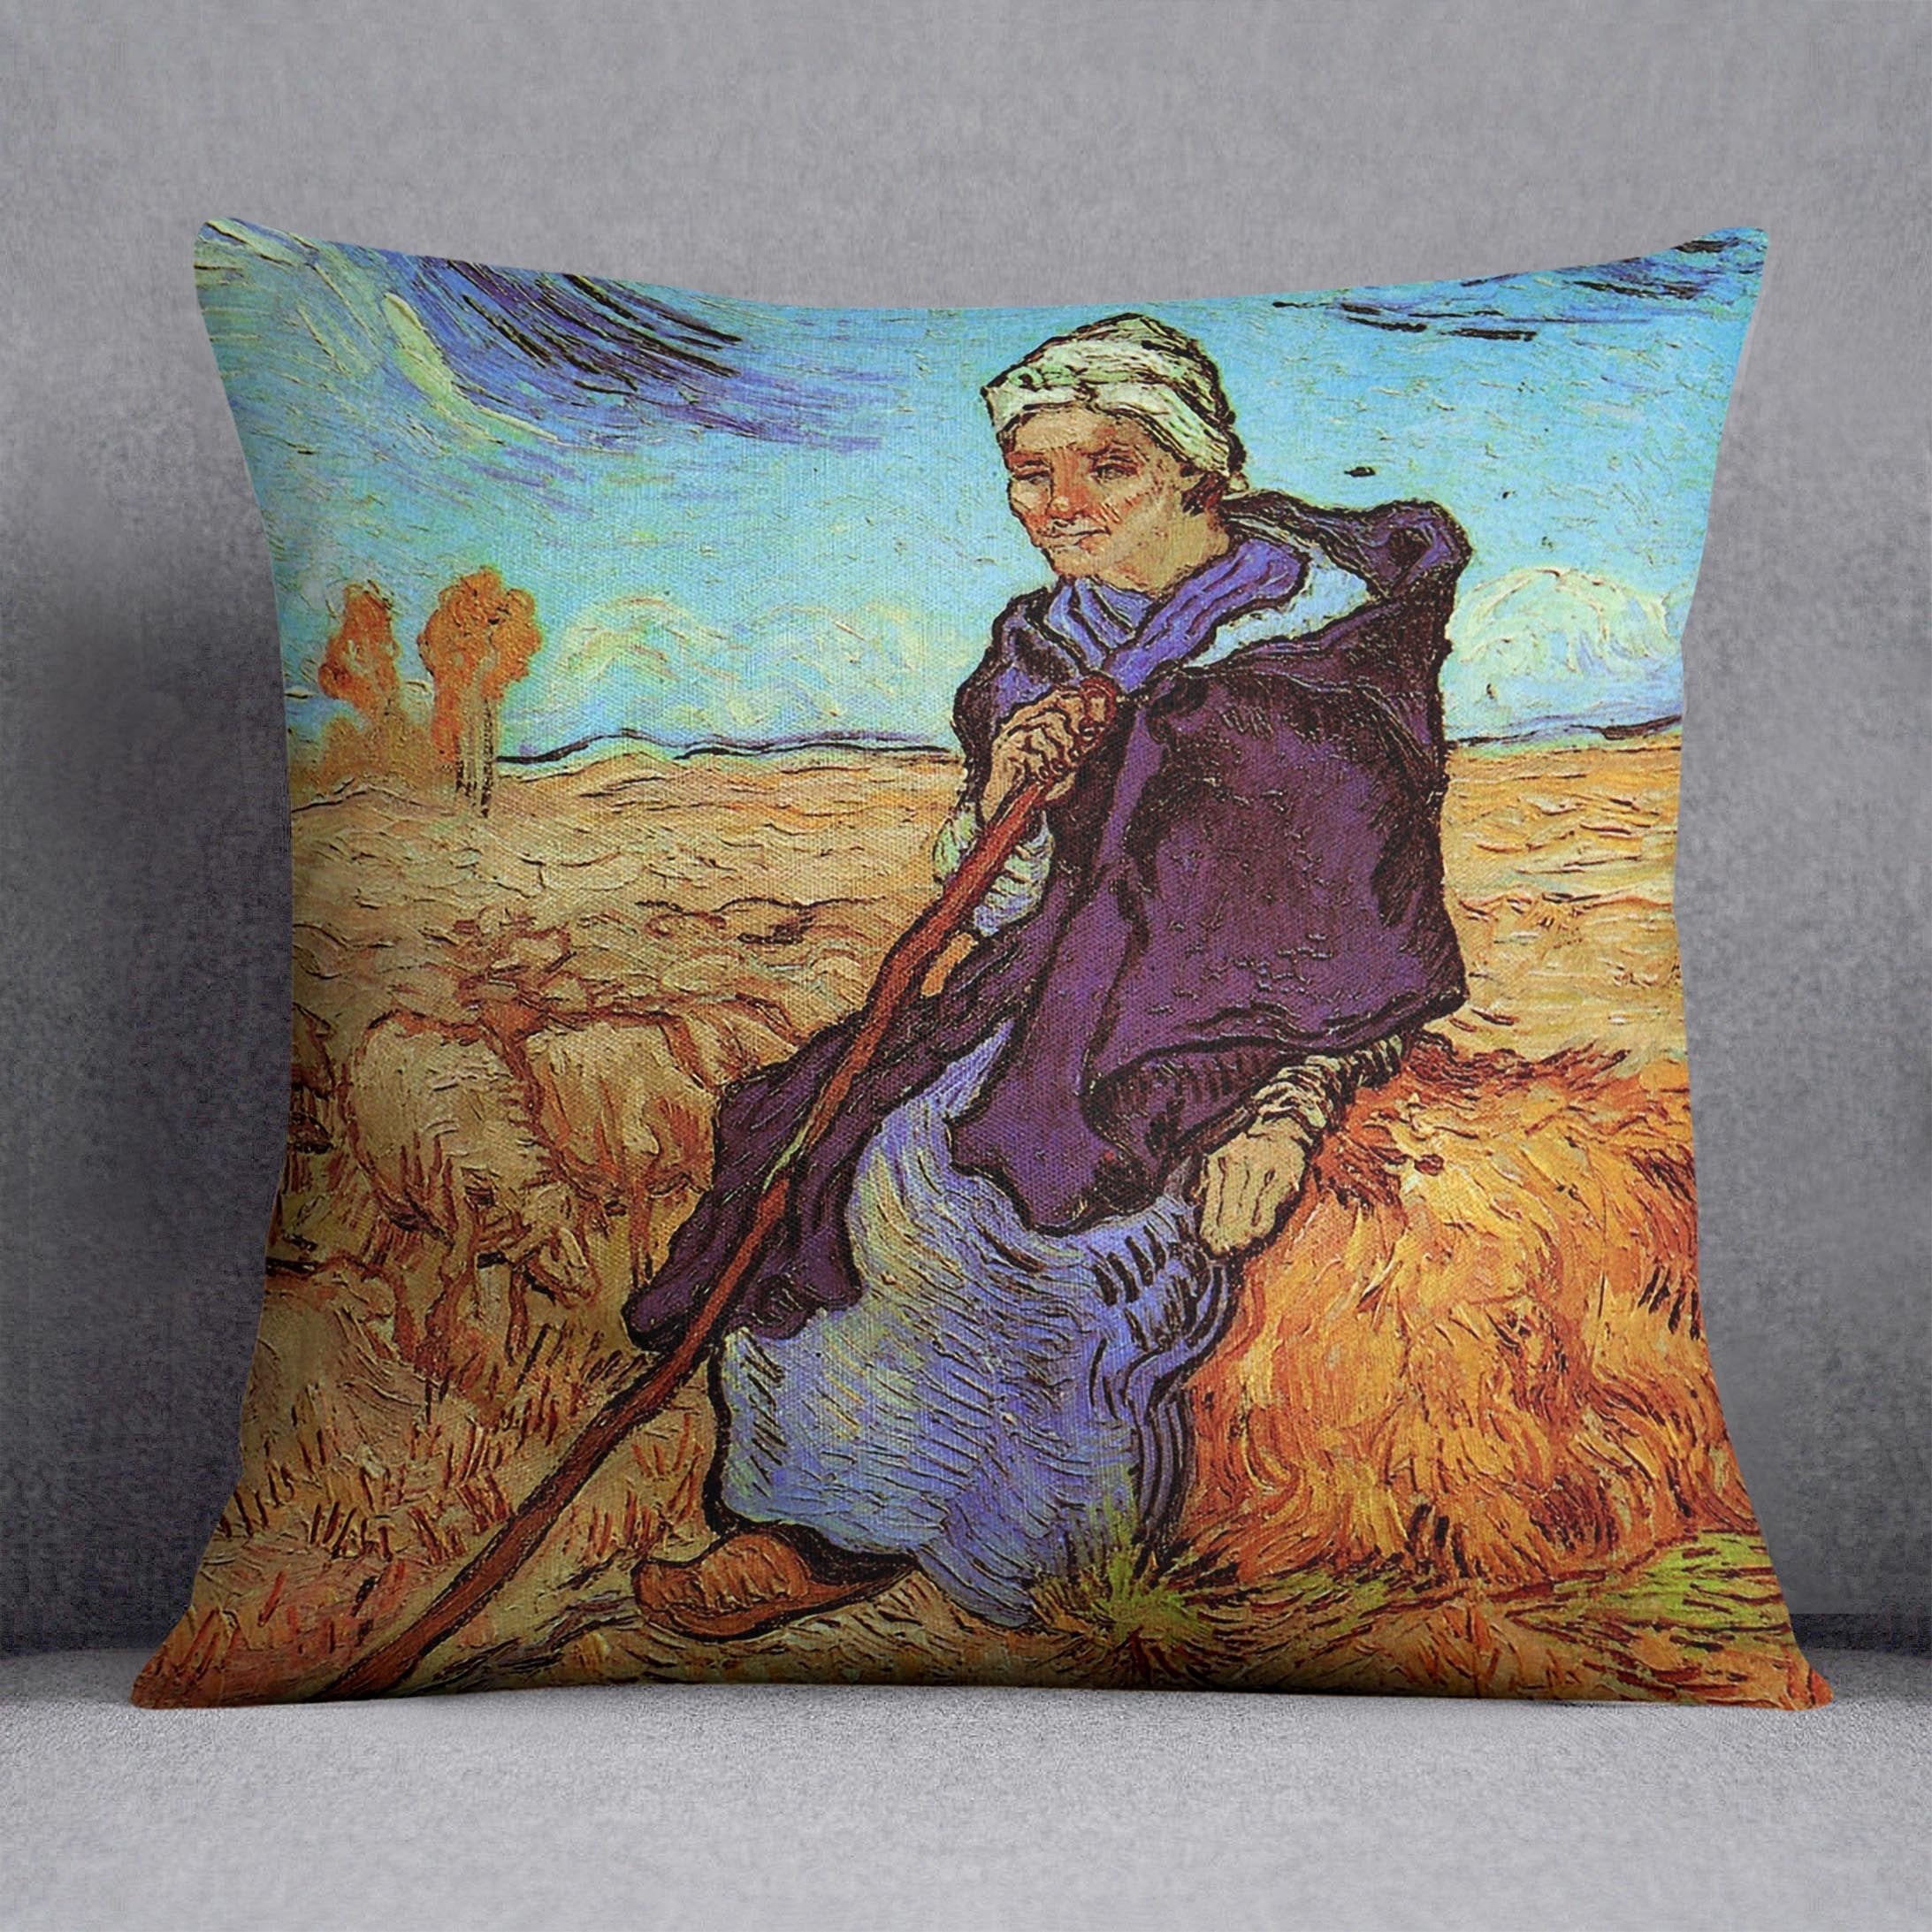 The Shepherdess after Millet by Van Gogh Throw Pillow